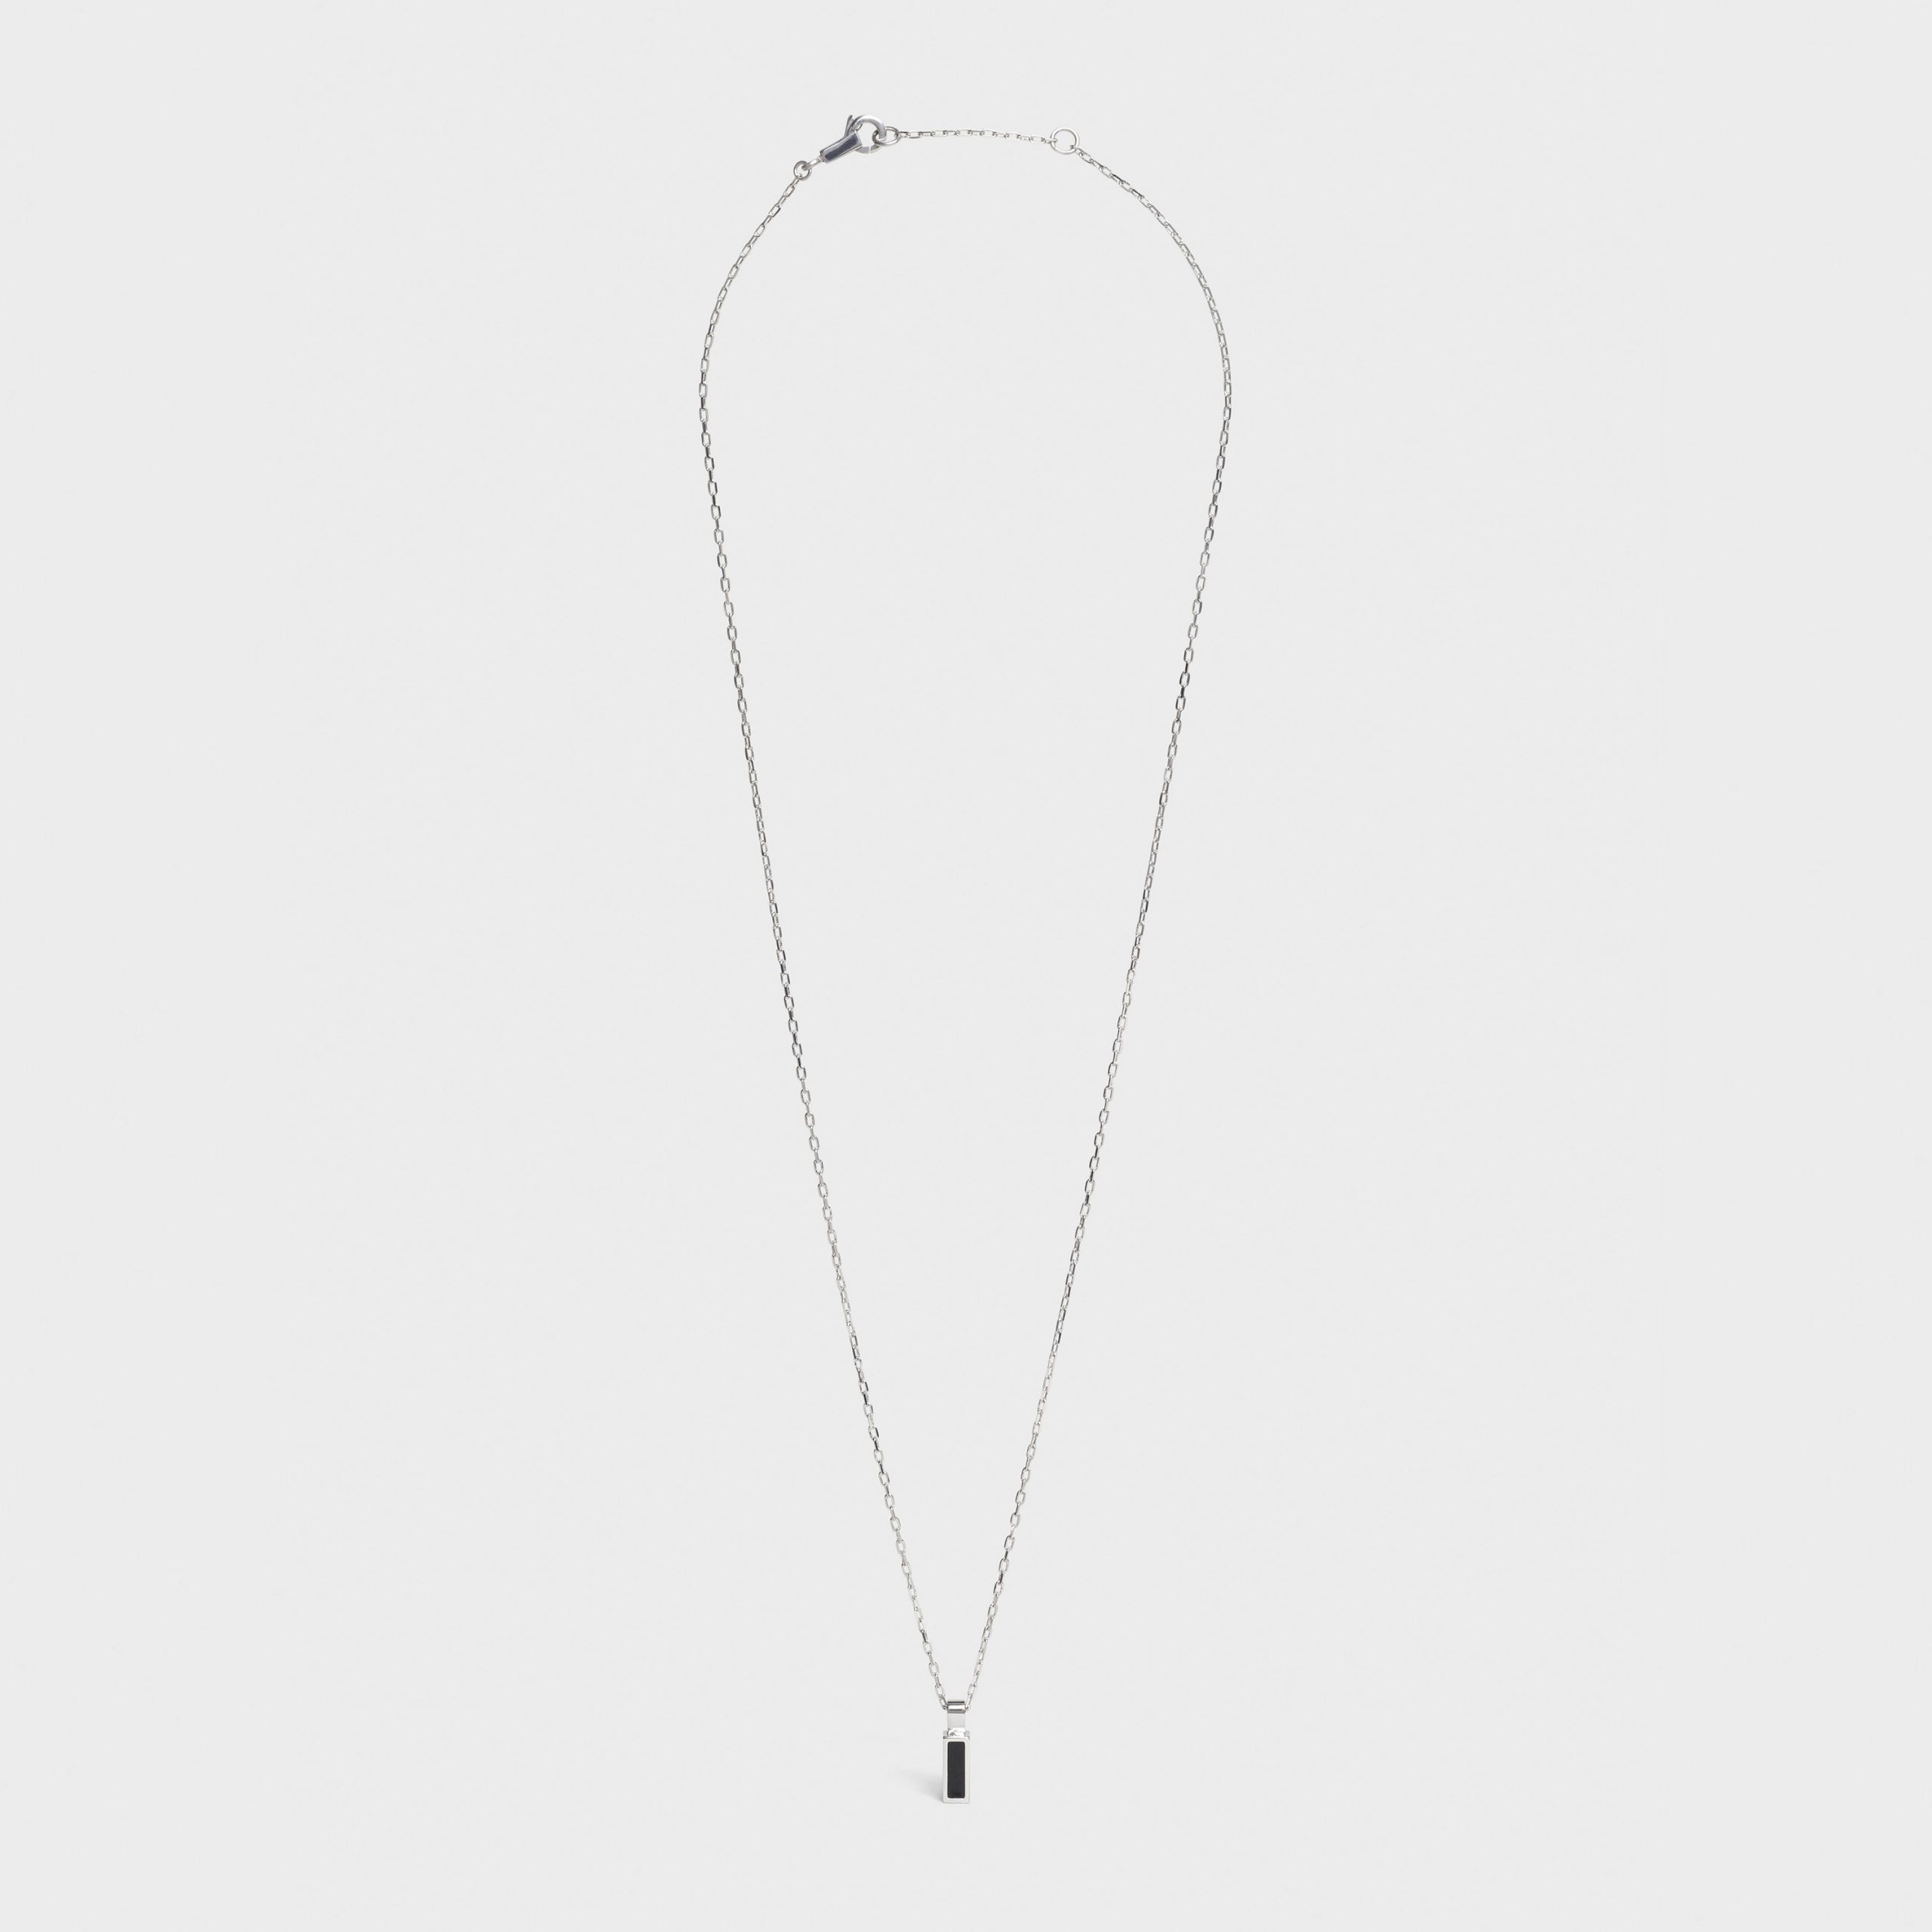 Celine Celine Sentimental Baguette Necklace In White Gold And Onyx – White Gold & Black – 46P266GWO.37WB